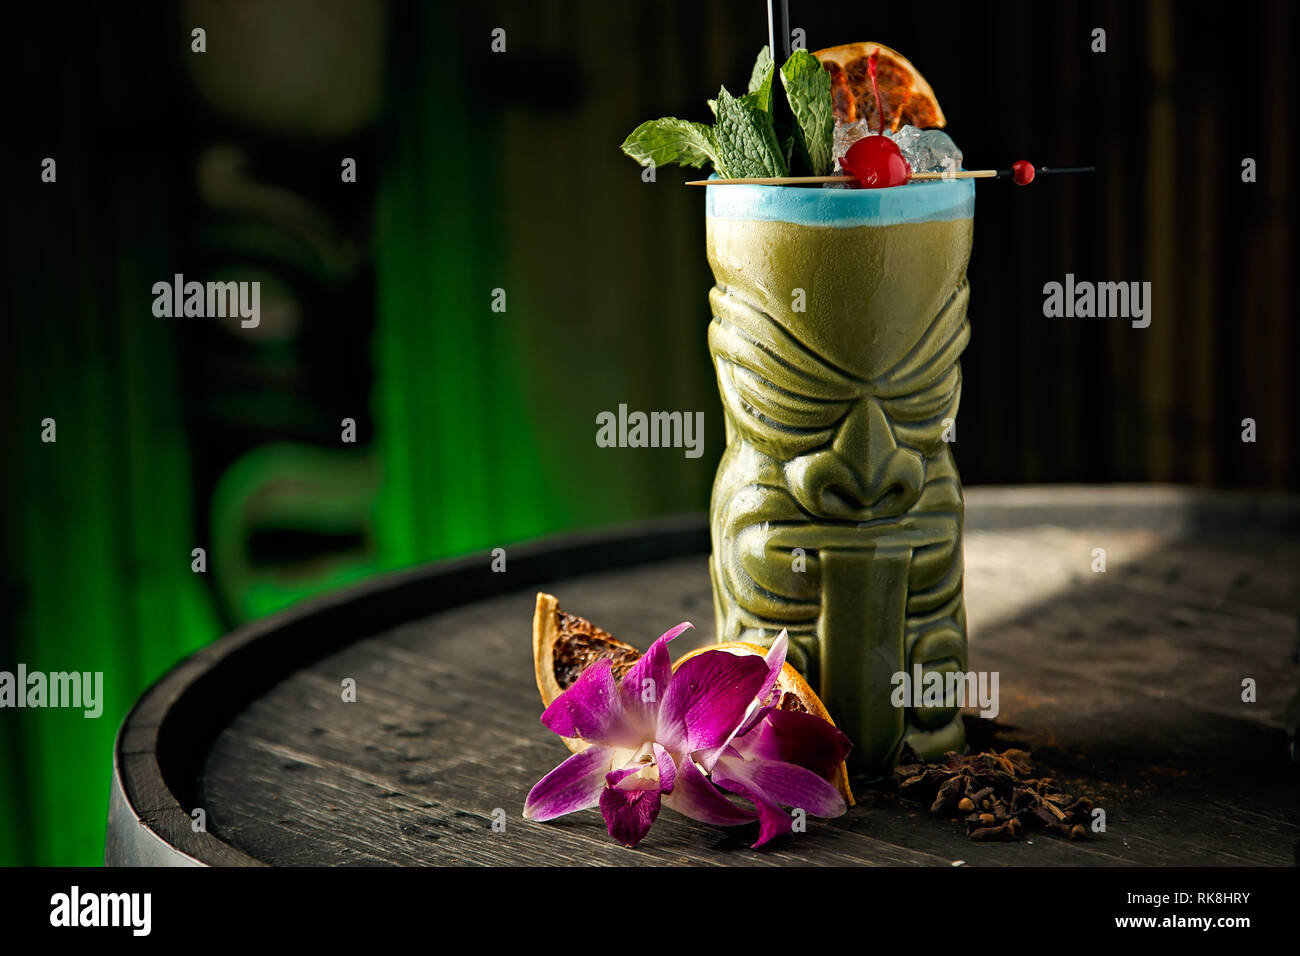 Fruity and refreshing Tiki drink served in a green Tiki Mug with a mint, cherry, and dry orange as garnishes Stock Photo